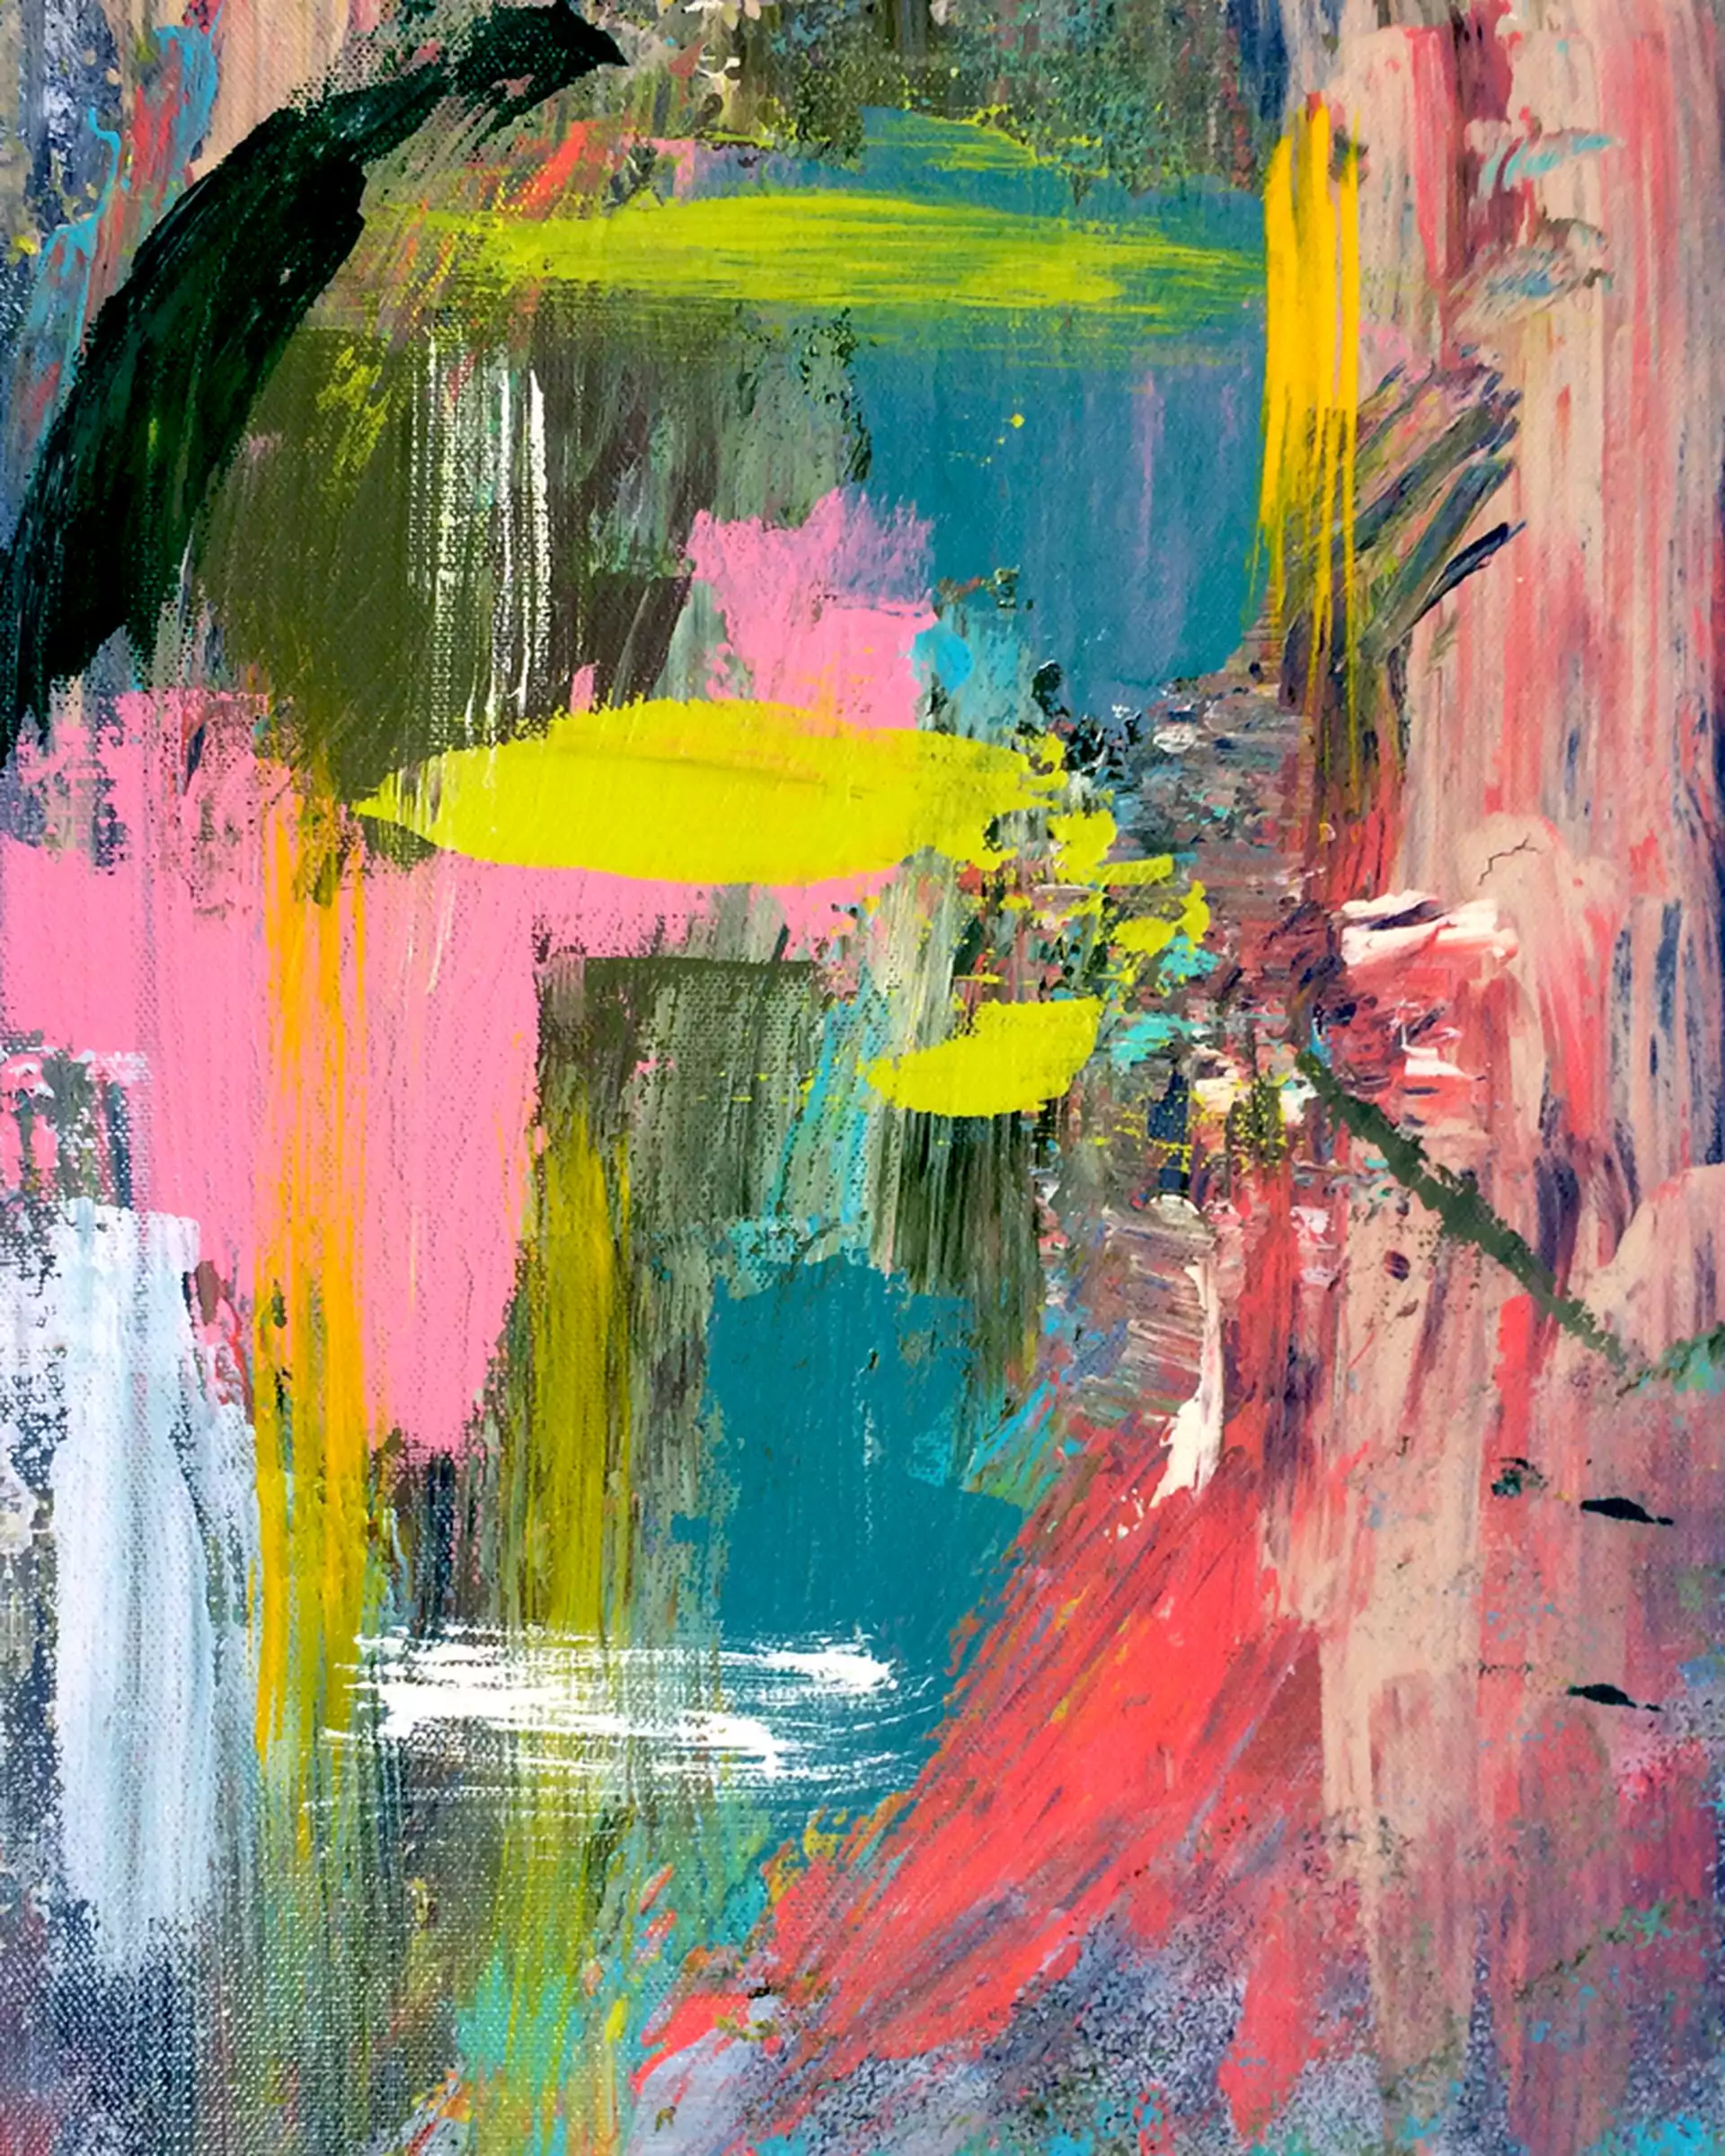 Collision - A Bright Abstract With Pinks, Greens, Blues, And Yellow Art Print by Alyssa Hamilton Art - X-Small